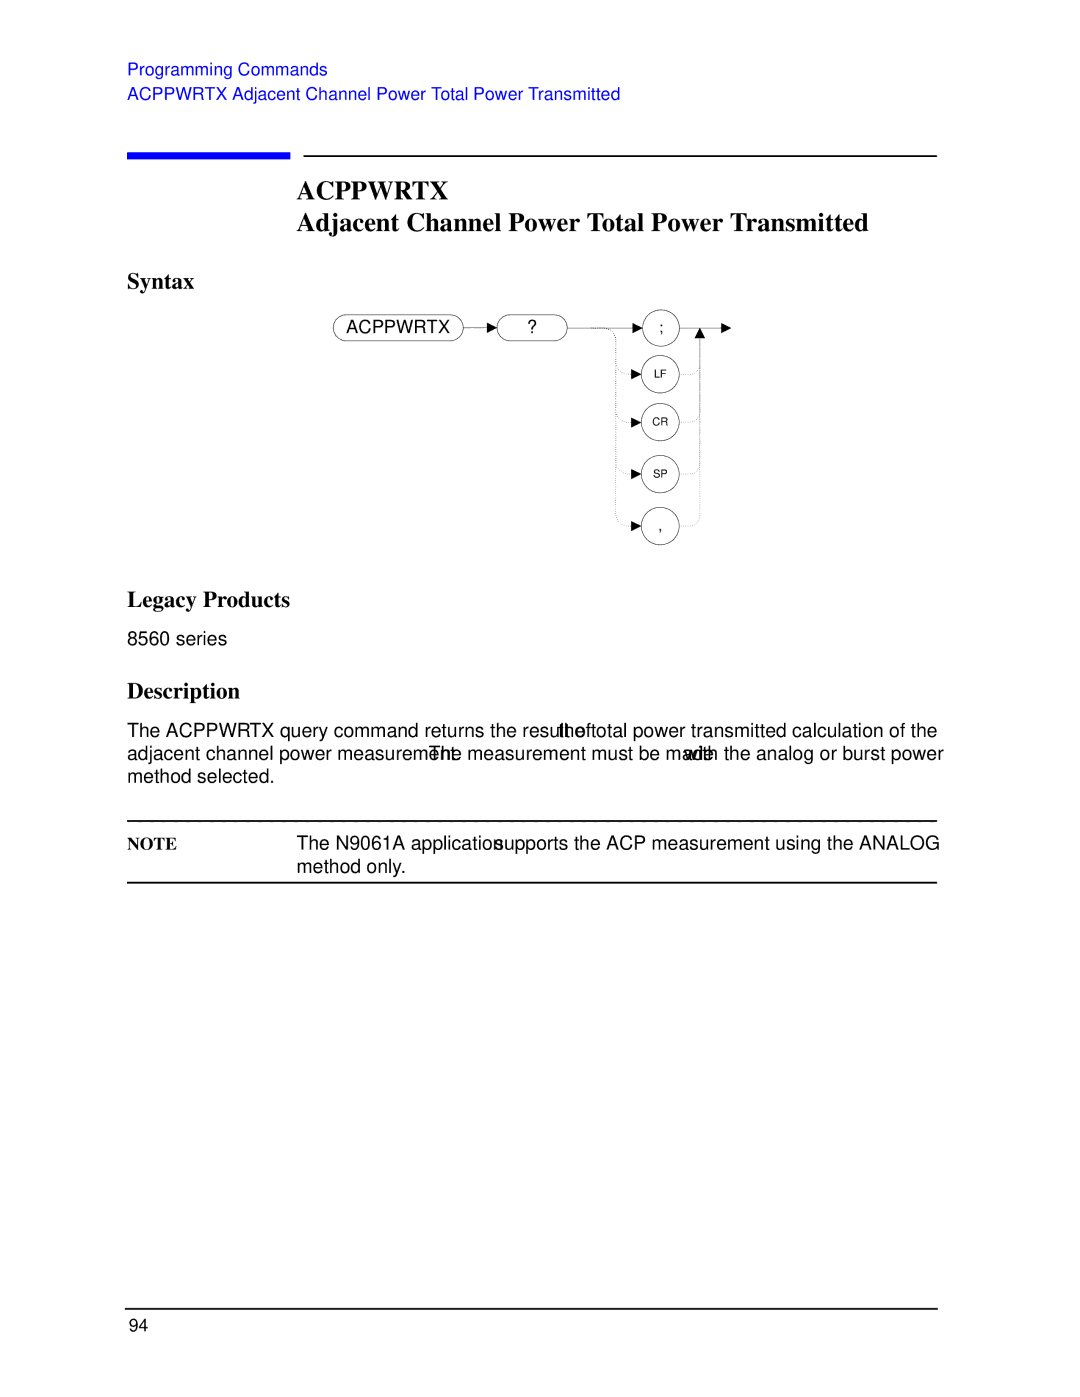 Agilent Technologies N9030a manual Acppwrtx, Adjacent Channel Power Total Power Transmitted 